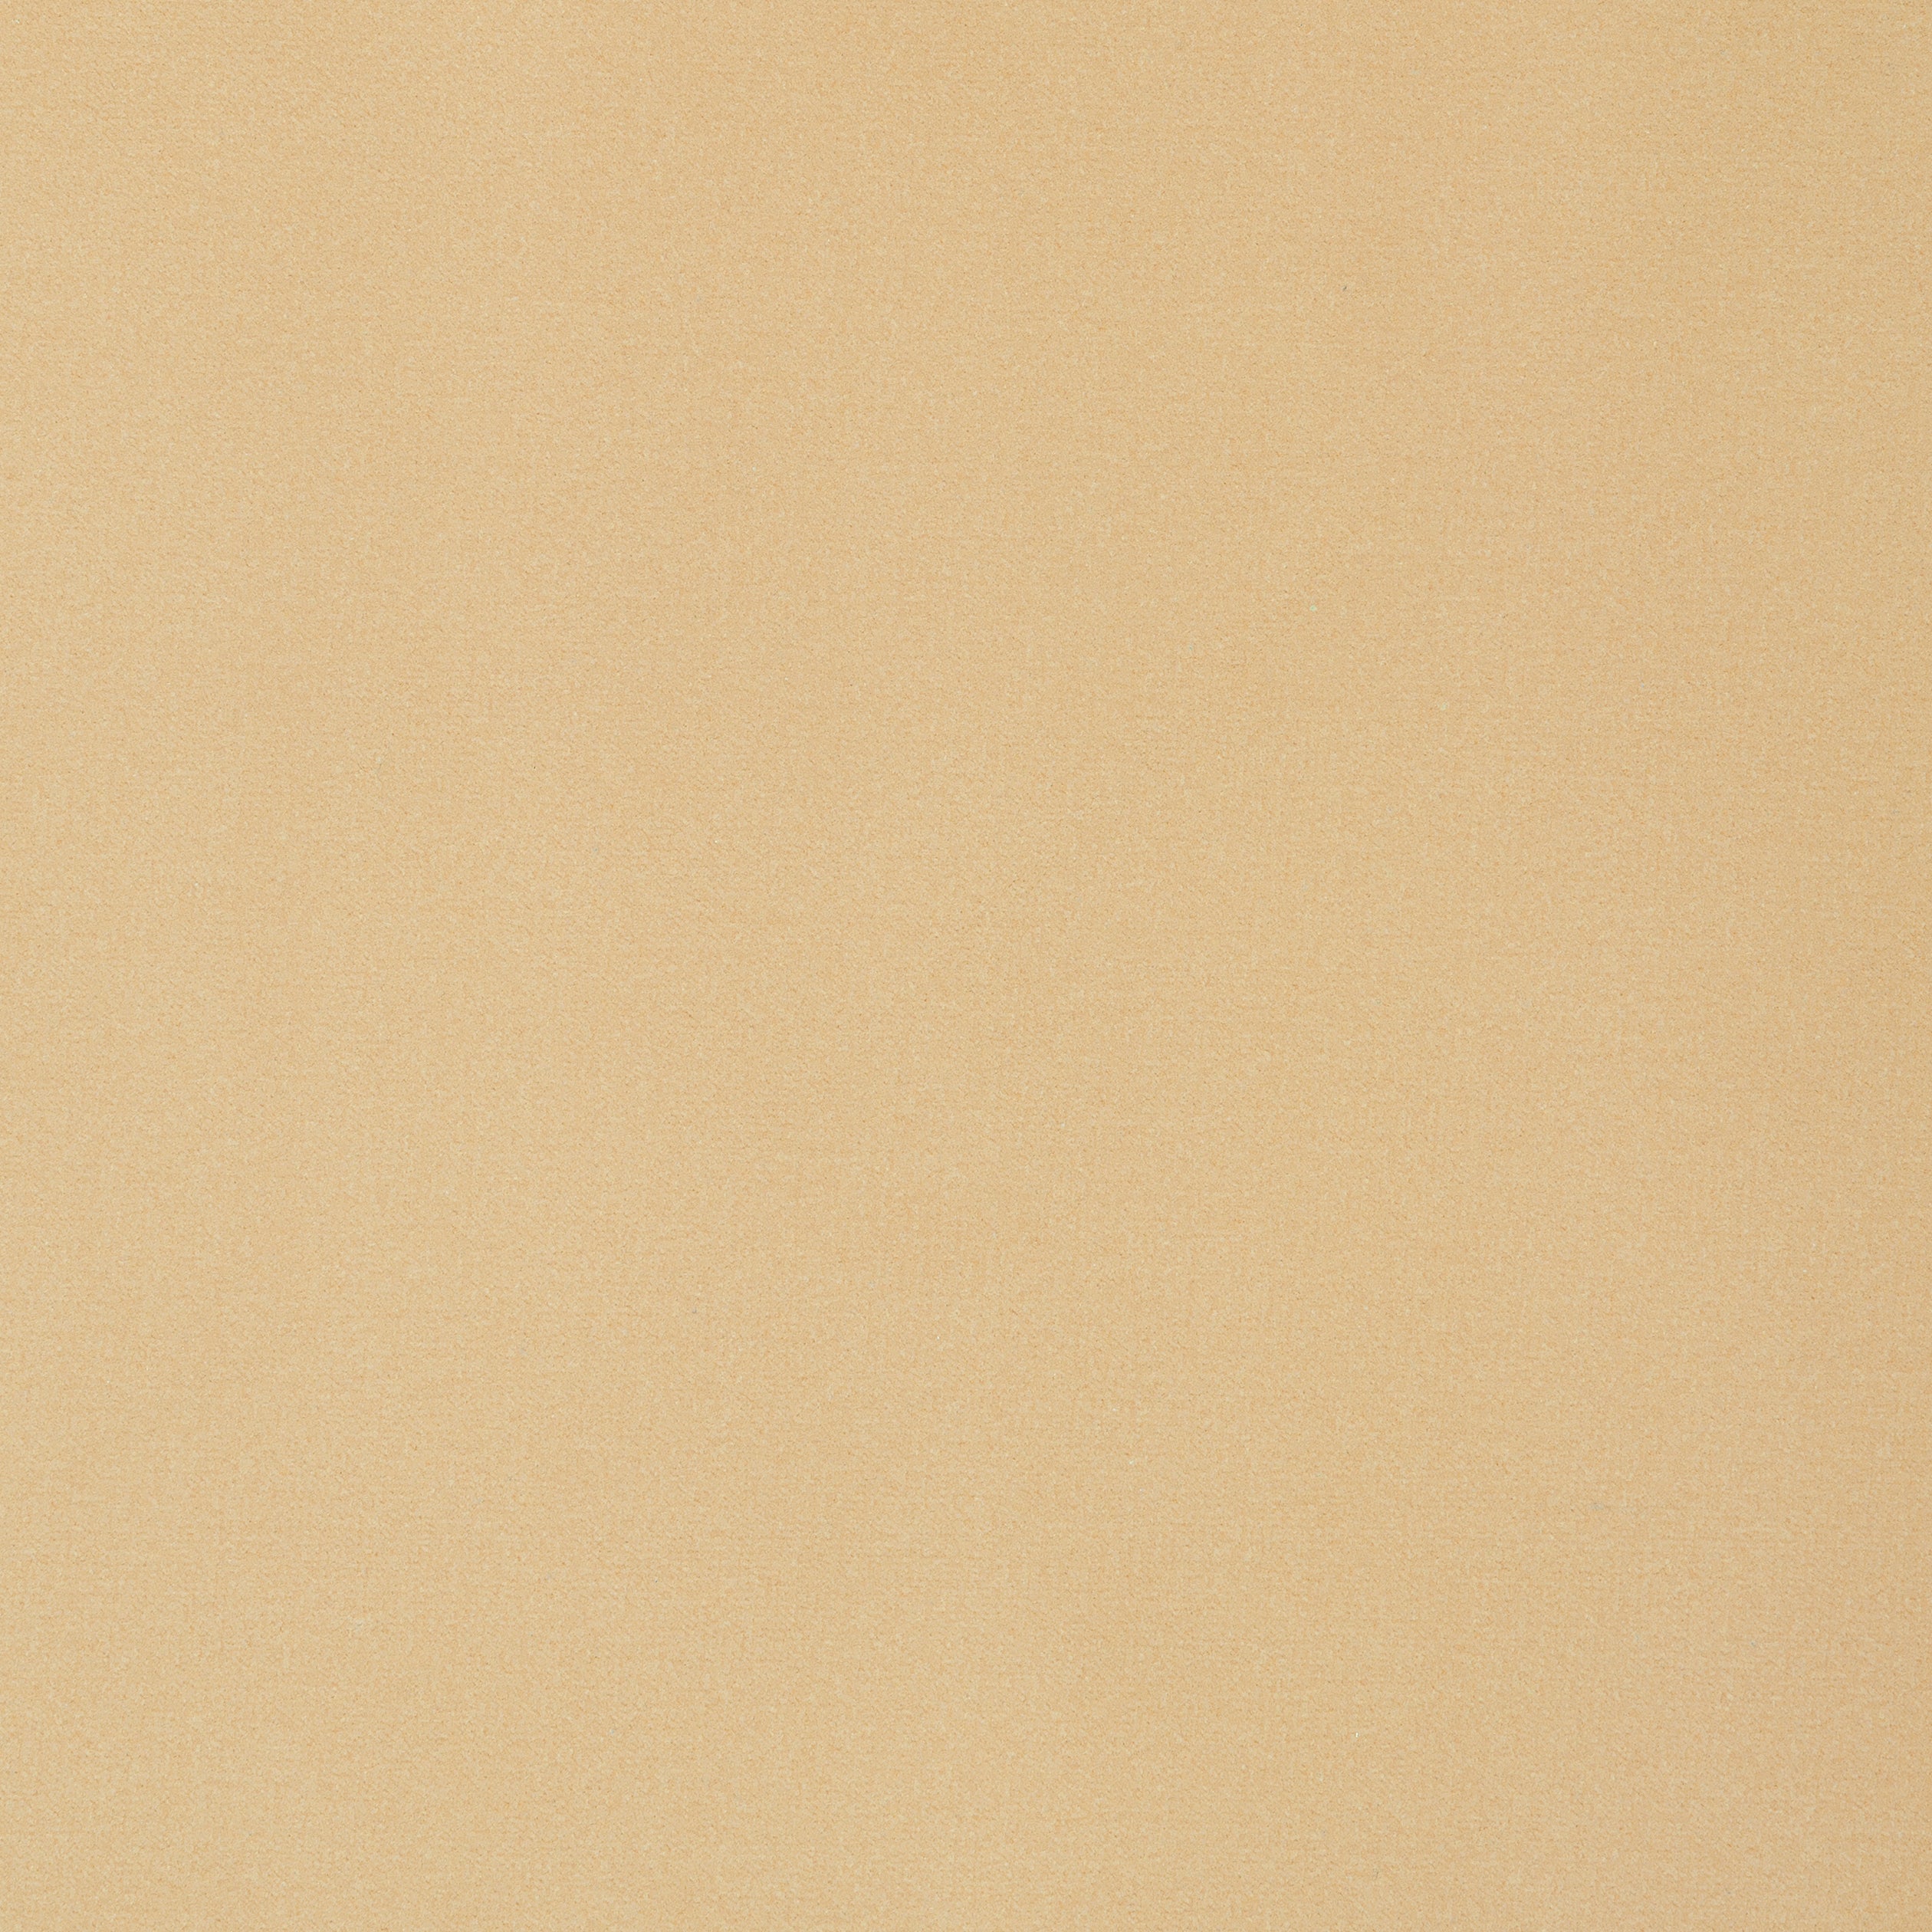 Lyra Velvet fabric in camel color - pattern number W8905 - by Thibaut in the Lyra Velvets collection